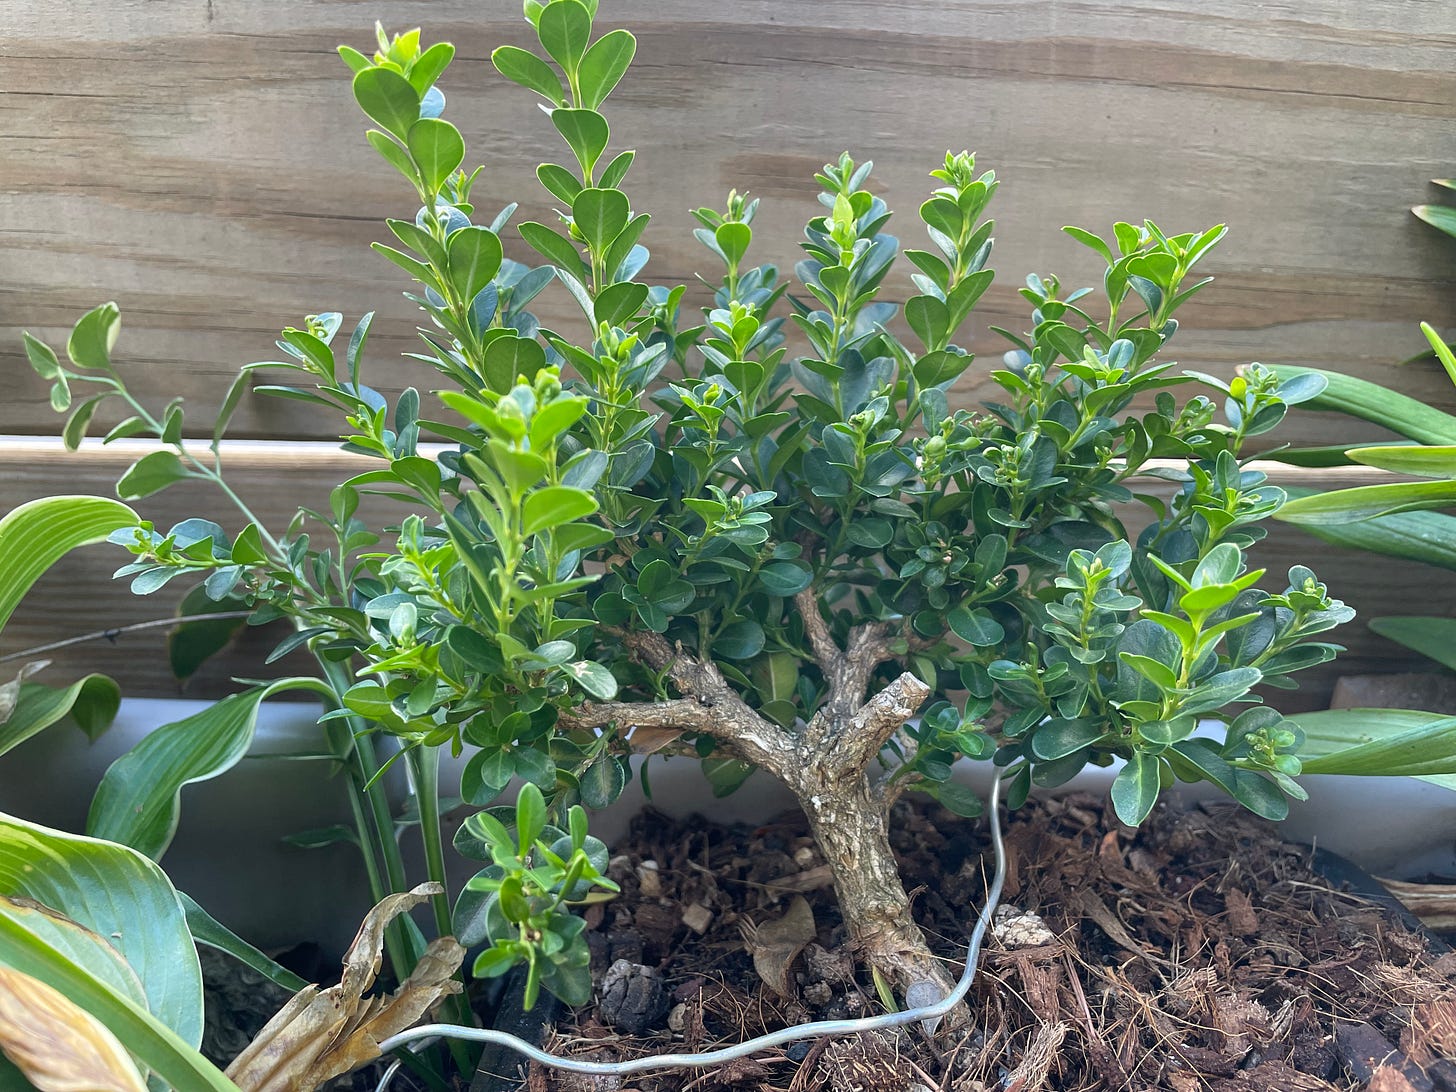 ID: Photo of green boxwood bonsai in a dense rounded pattern with fresh shoots pointing upwards.